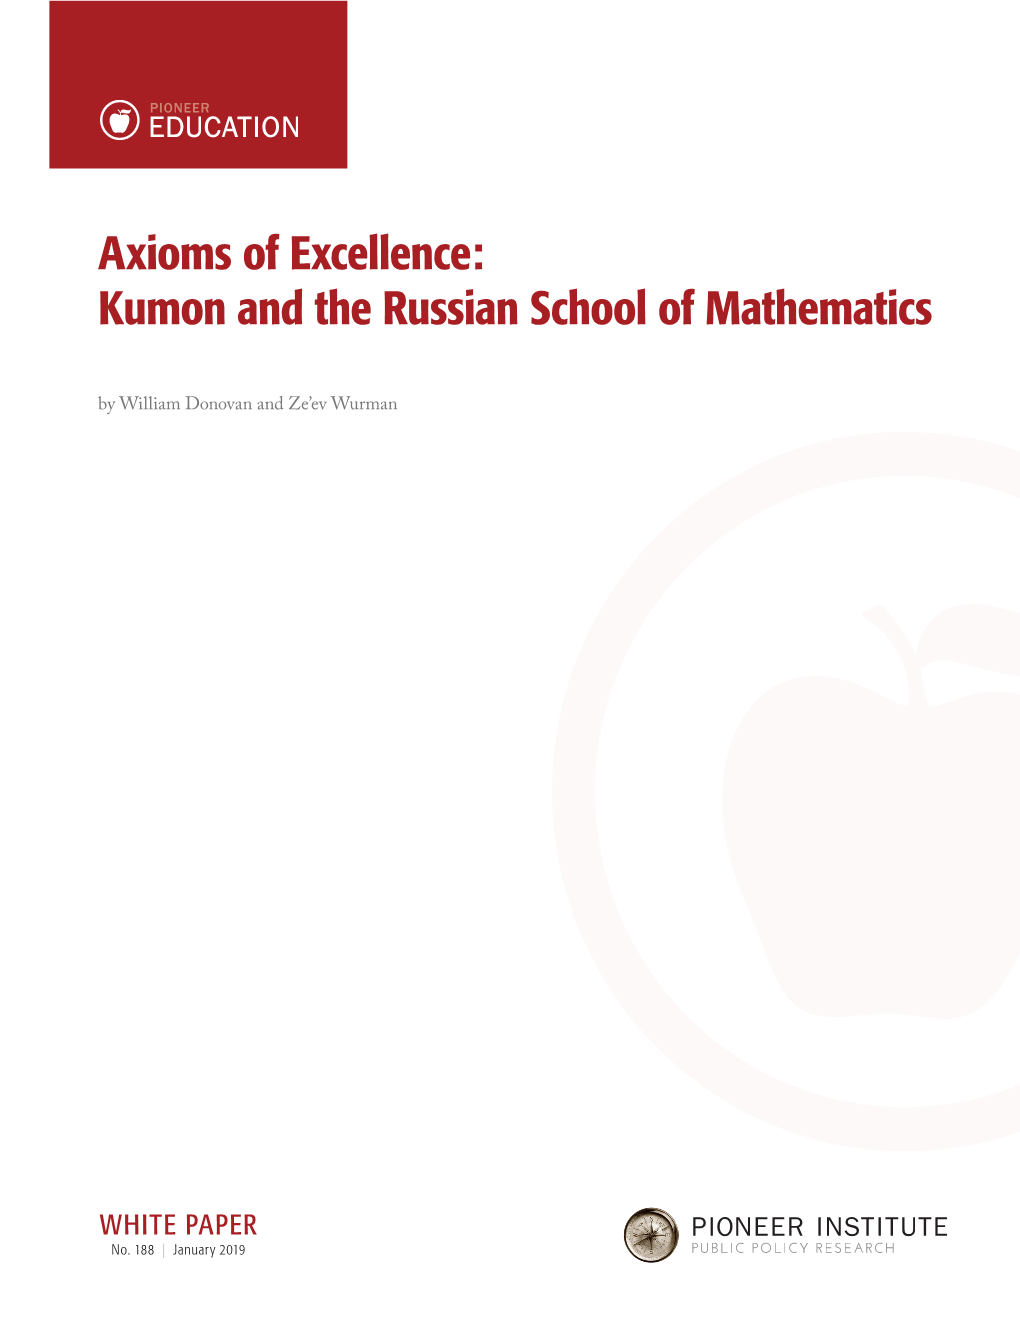 Axioms of Excellence: Kumon and the Russian School of Mathematics